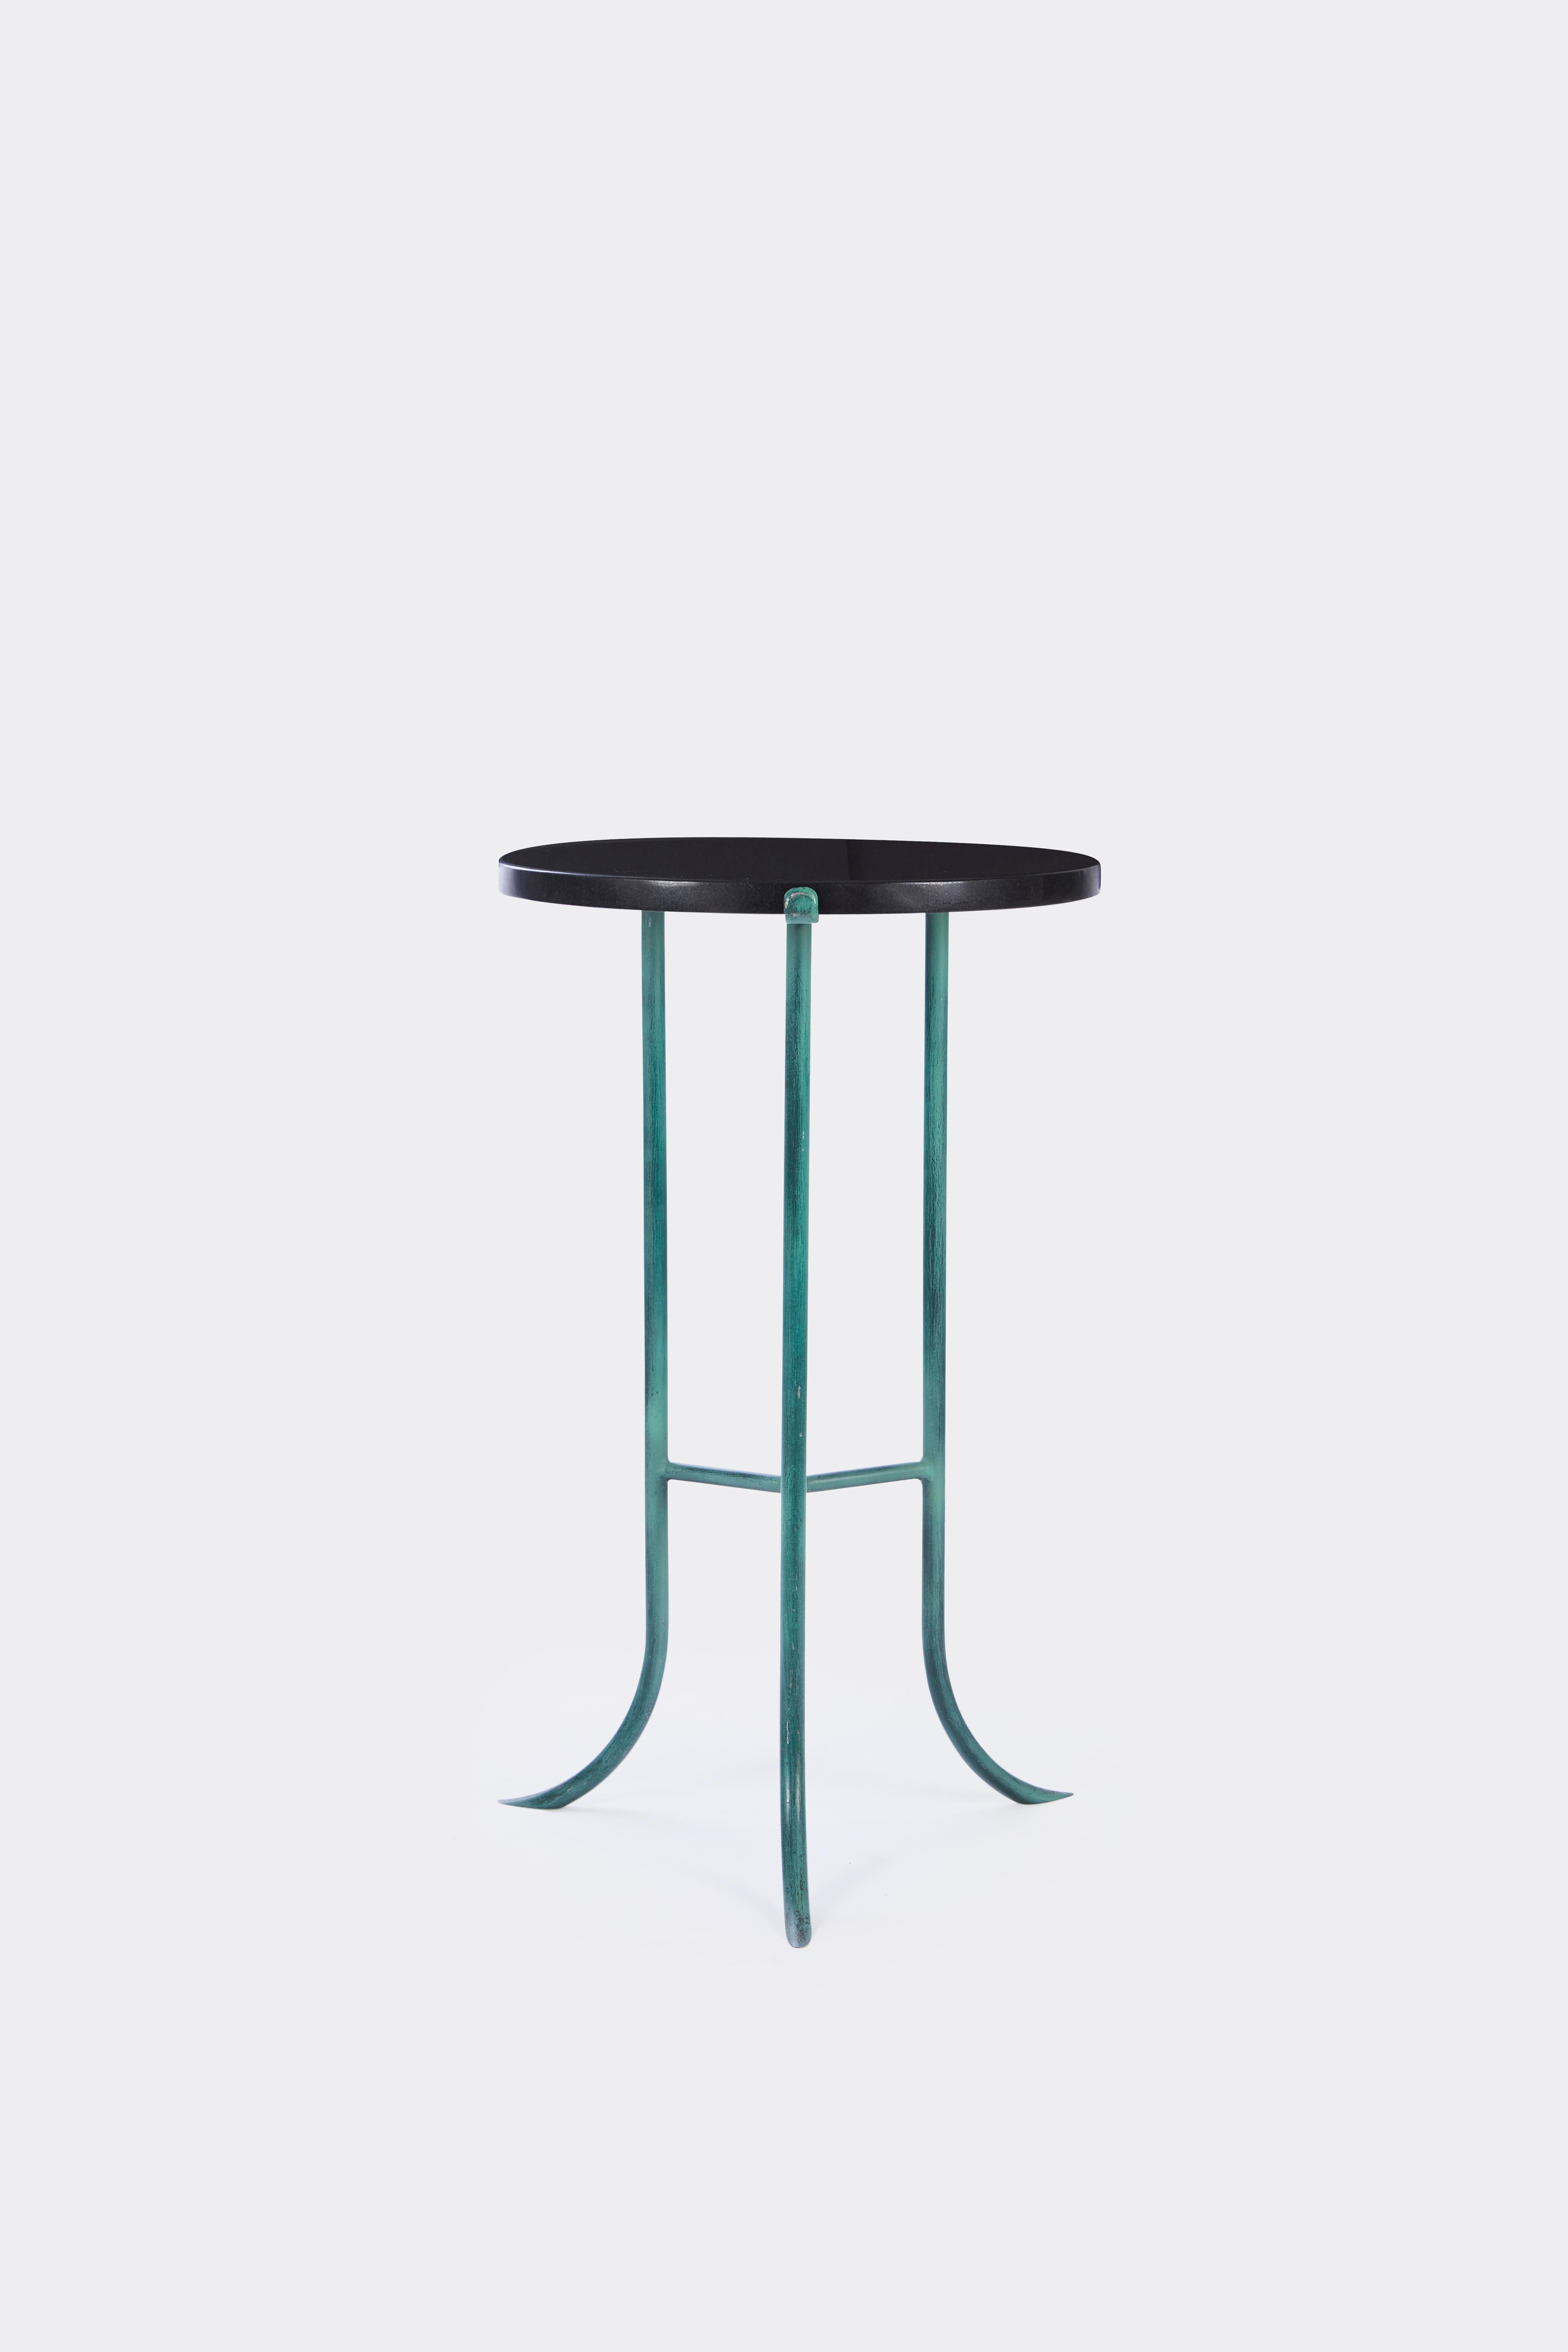 Cedric Hartman Styled Verdigris Table In Good Condition For Sale In New York, NY